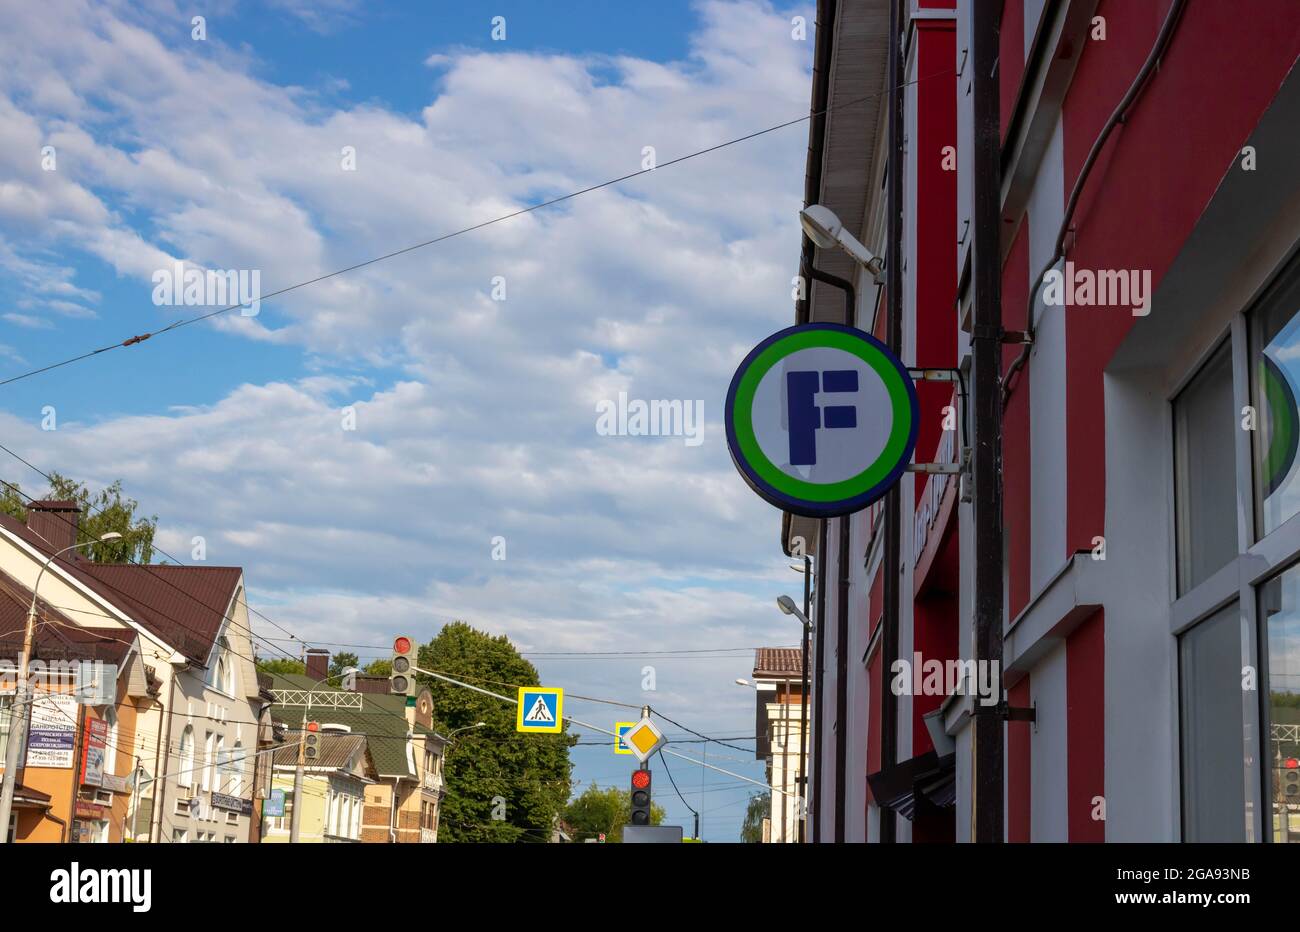 Rybinsk, Russia. 21.07. 2021. Fixed price luminous logo on the facade of the building. A Russian chain of stores with discounts and low prices. The ne Stock Photo